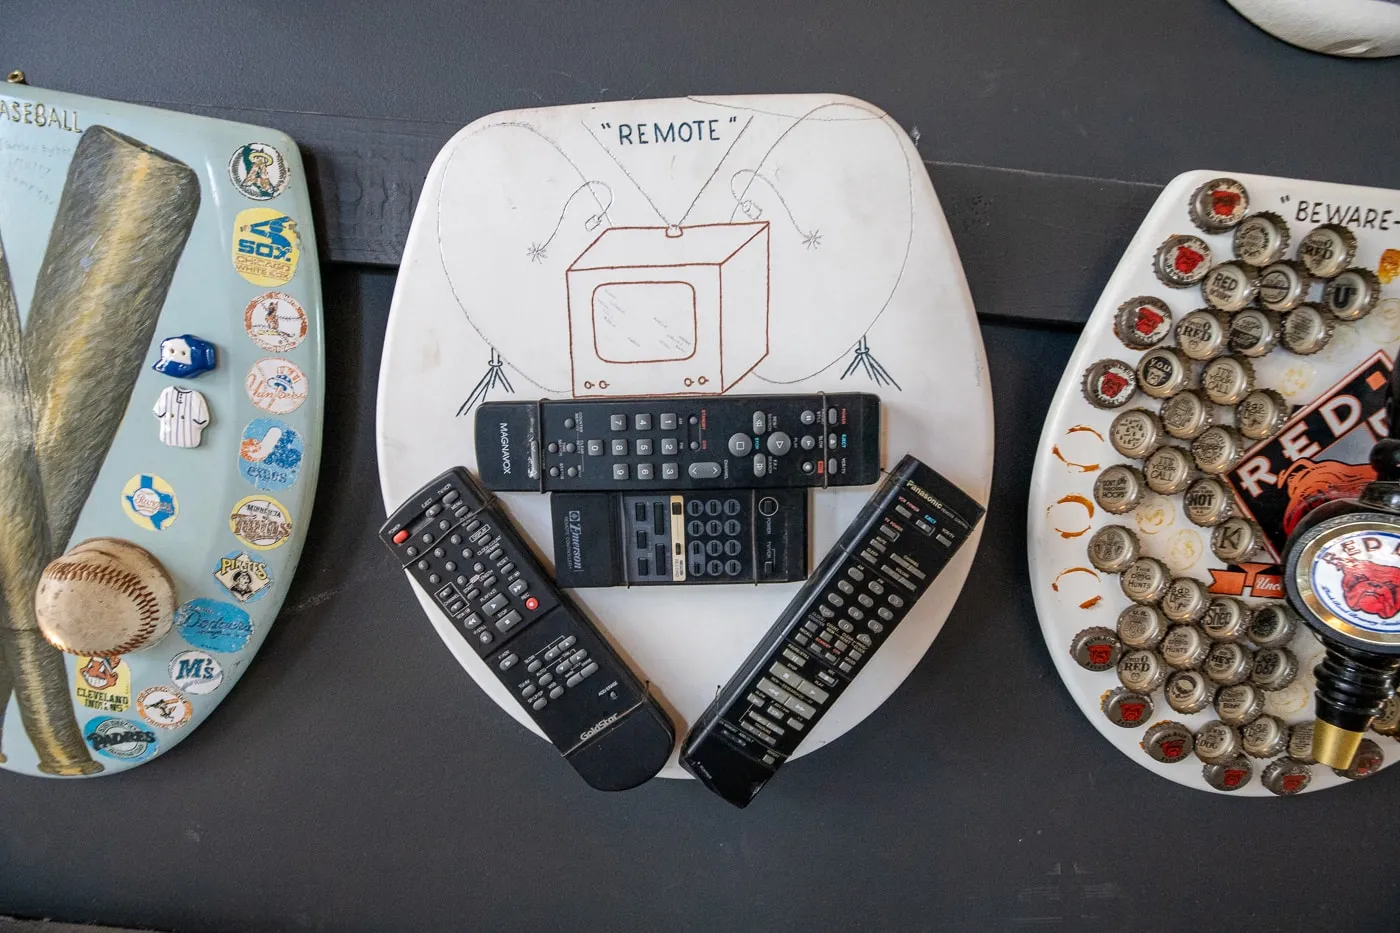 Remote Control toilet seat - Barney Smith's Toilet Seat Art Museum in The Colony, Texas at The Truck Yard Bar